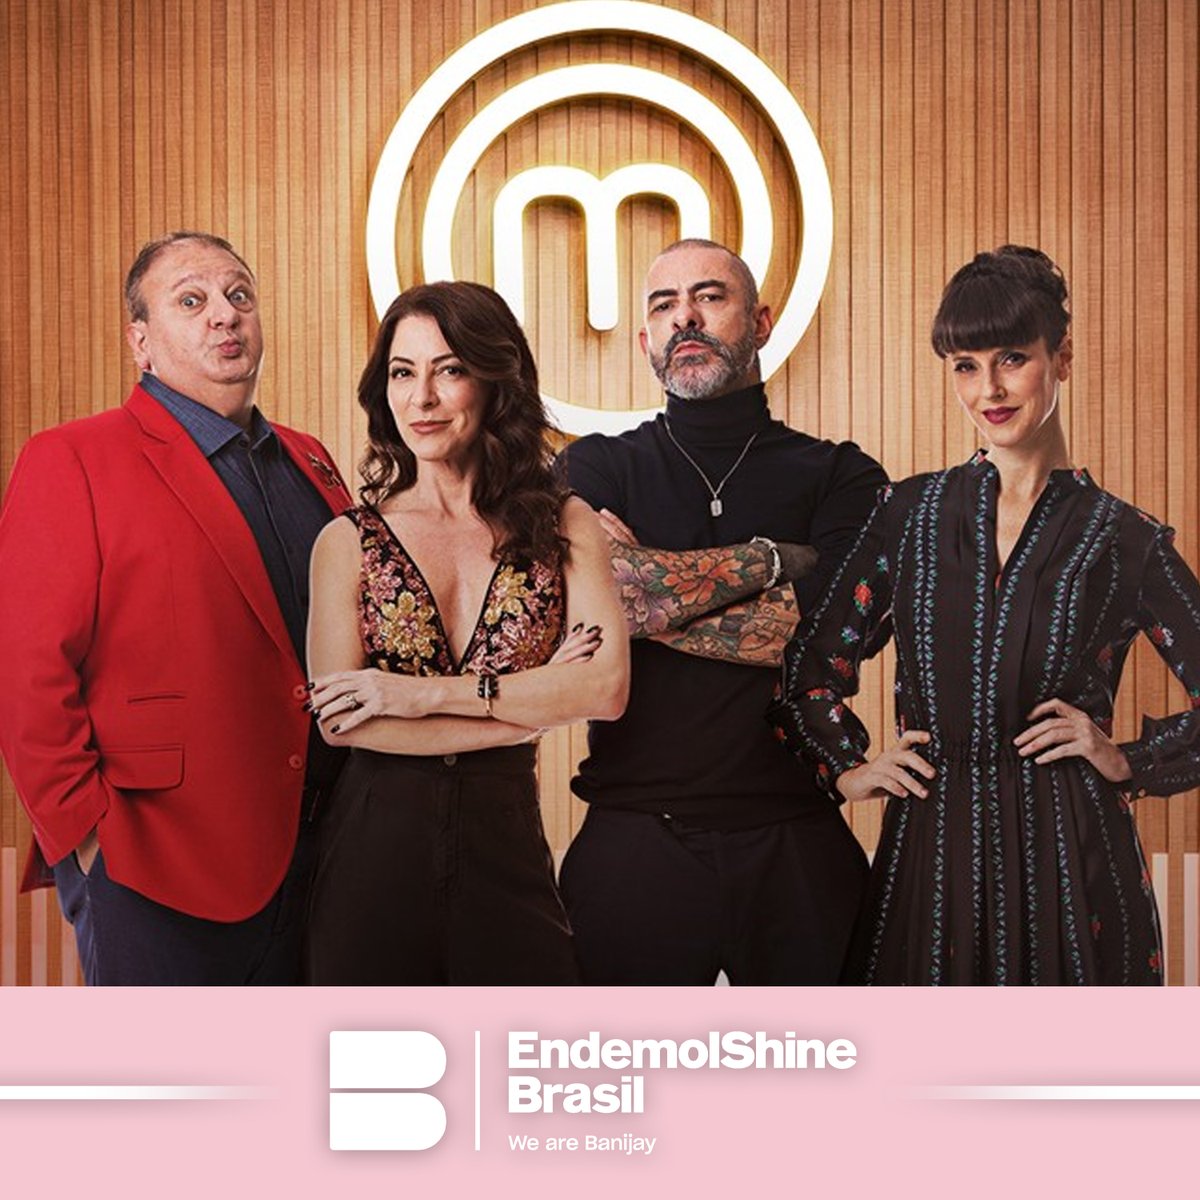 Hot on the heels of the show’s 10th anniversary, @EndemolShineBR’s #MasterChefBR Season 11 is set to premiere May 28 on @BandTV.